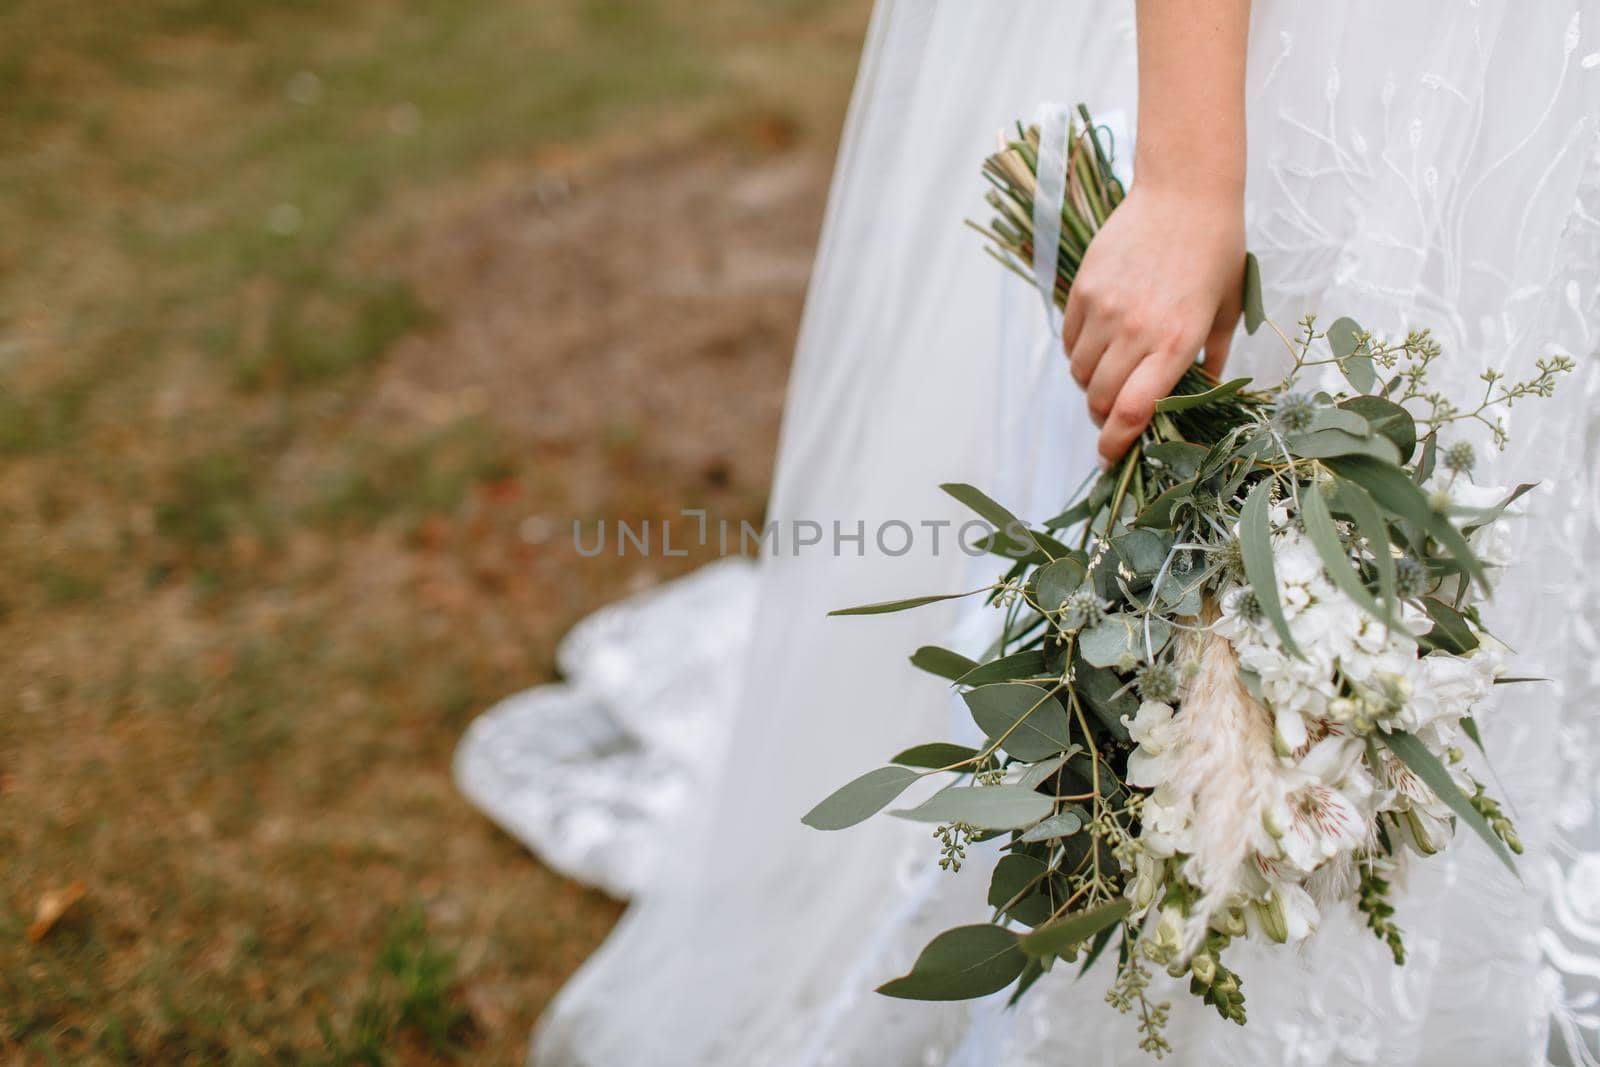 beautiful wedding bouquet in the hands of the bride. The bride holds a bouquet by deandy